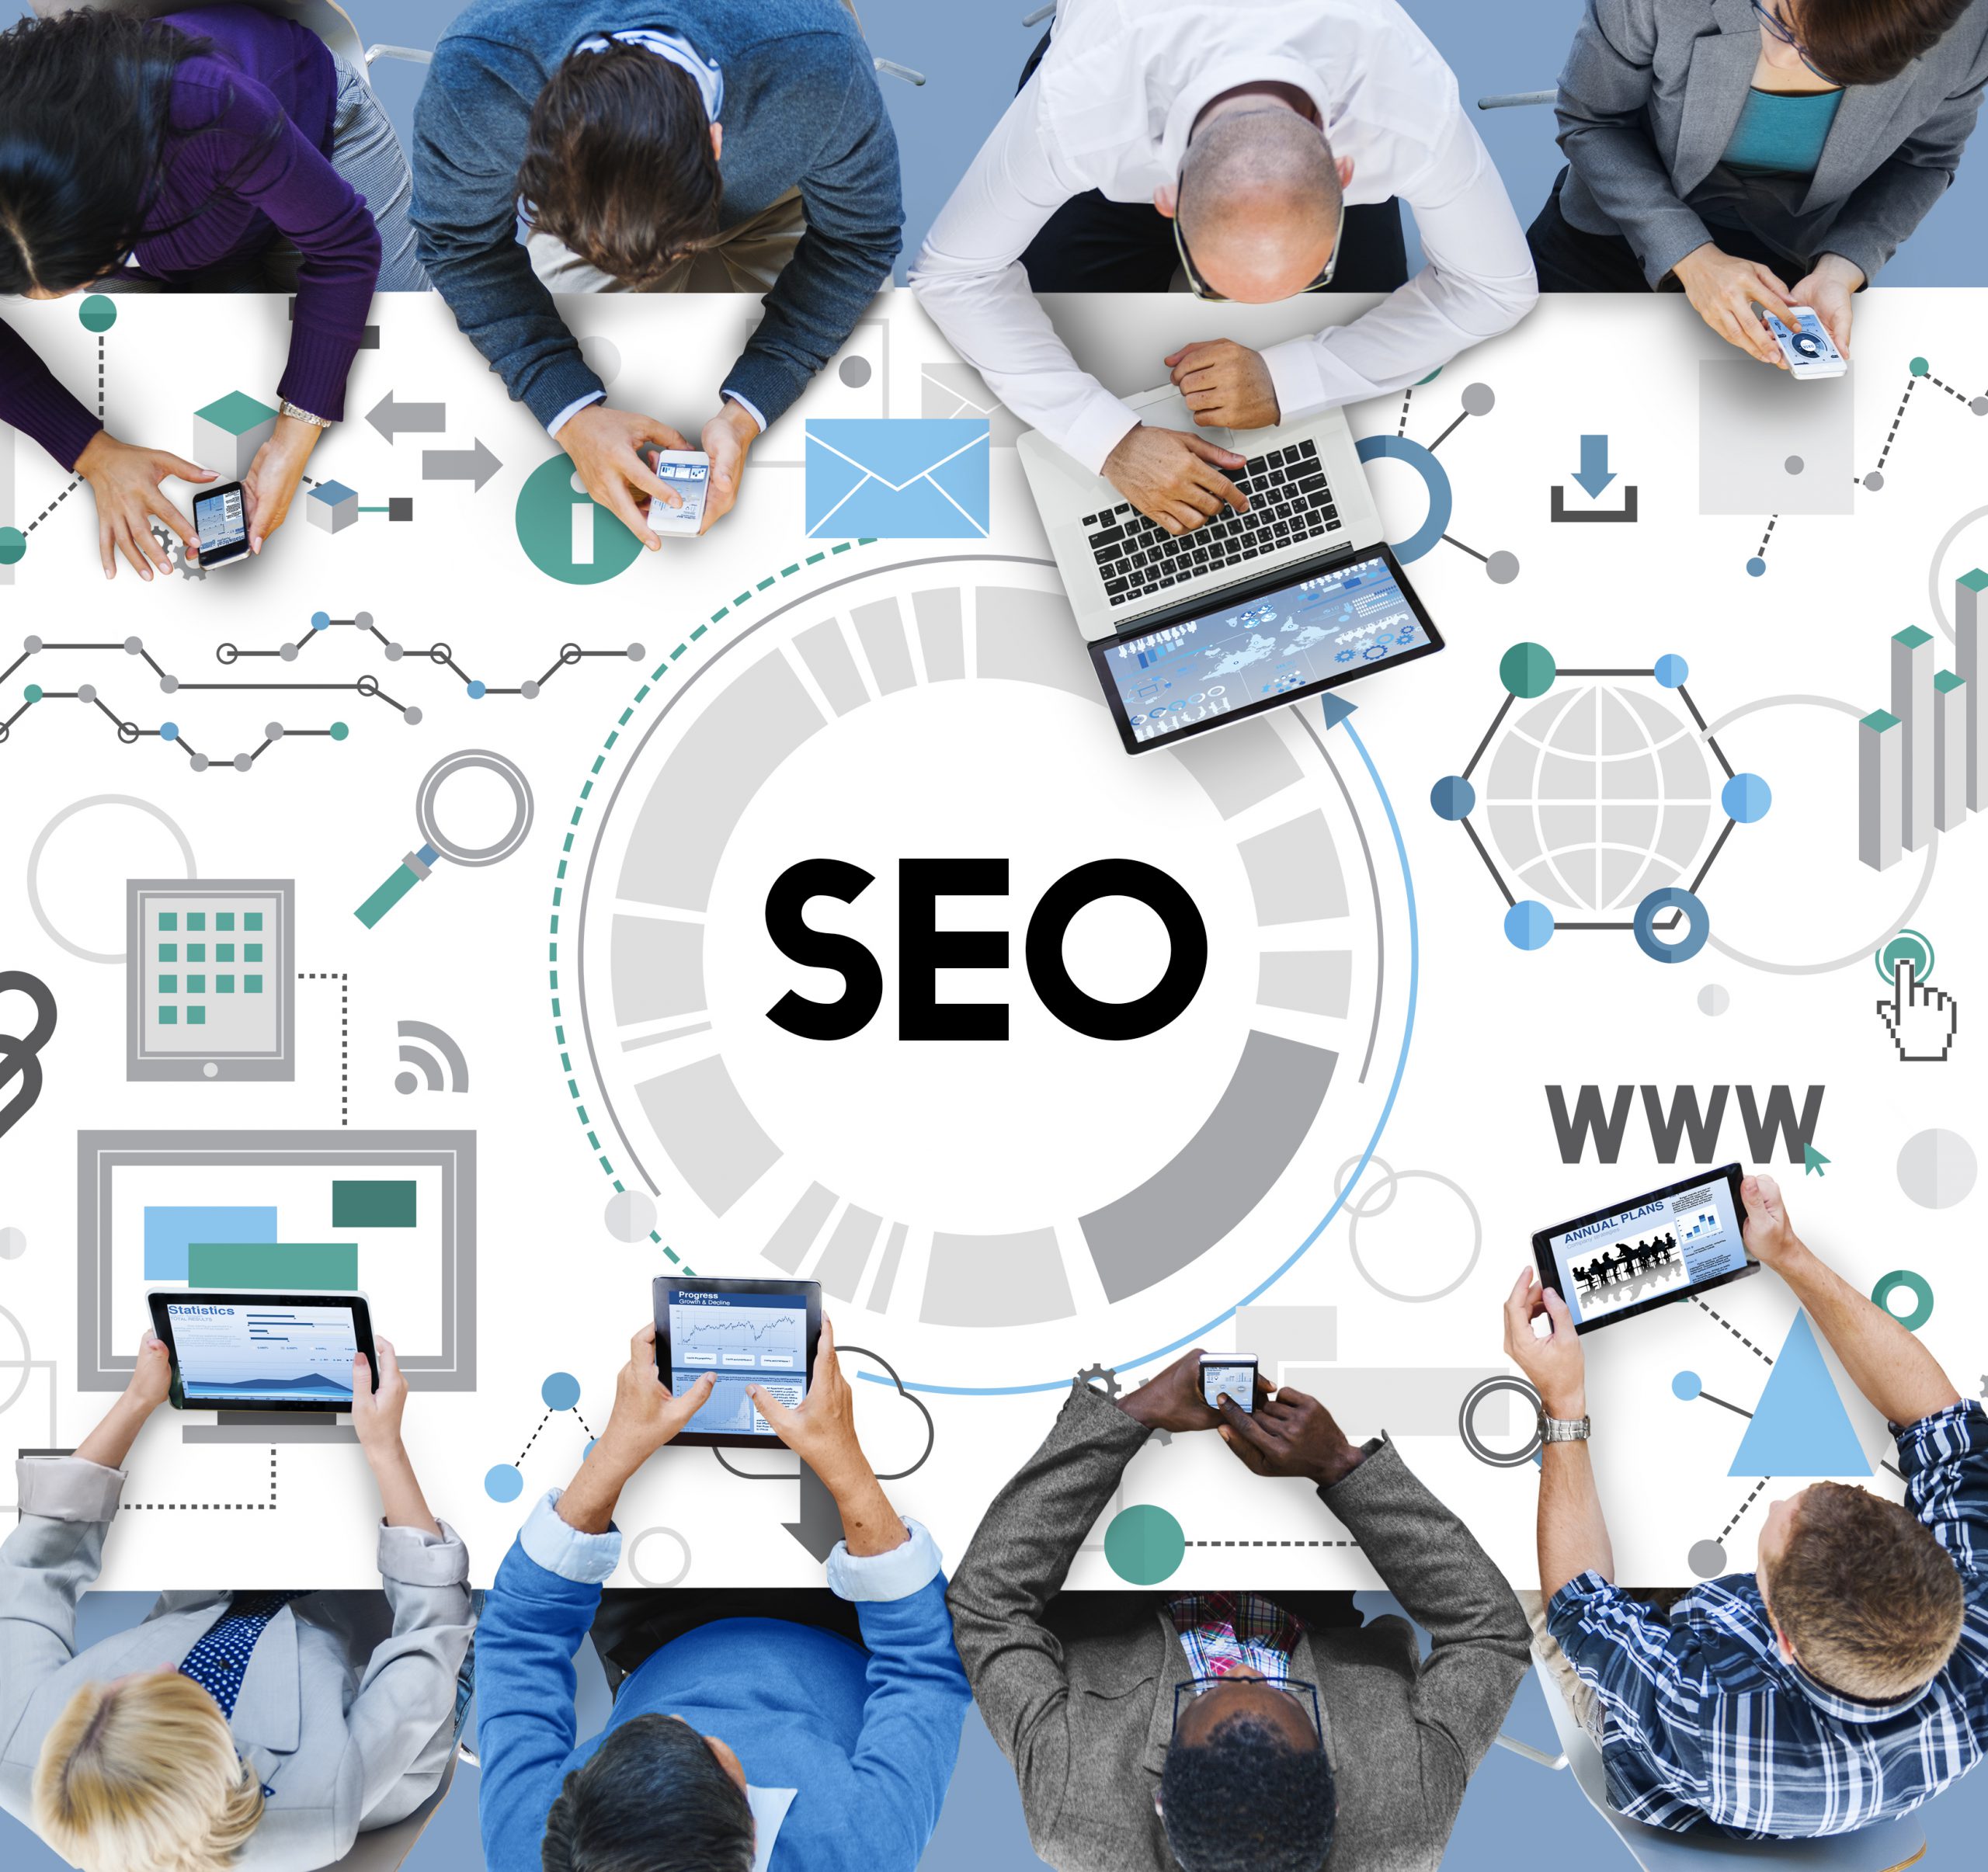 5 Major Common SEO Mistakes in Digital Marketing Campaigns